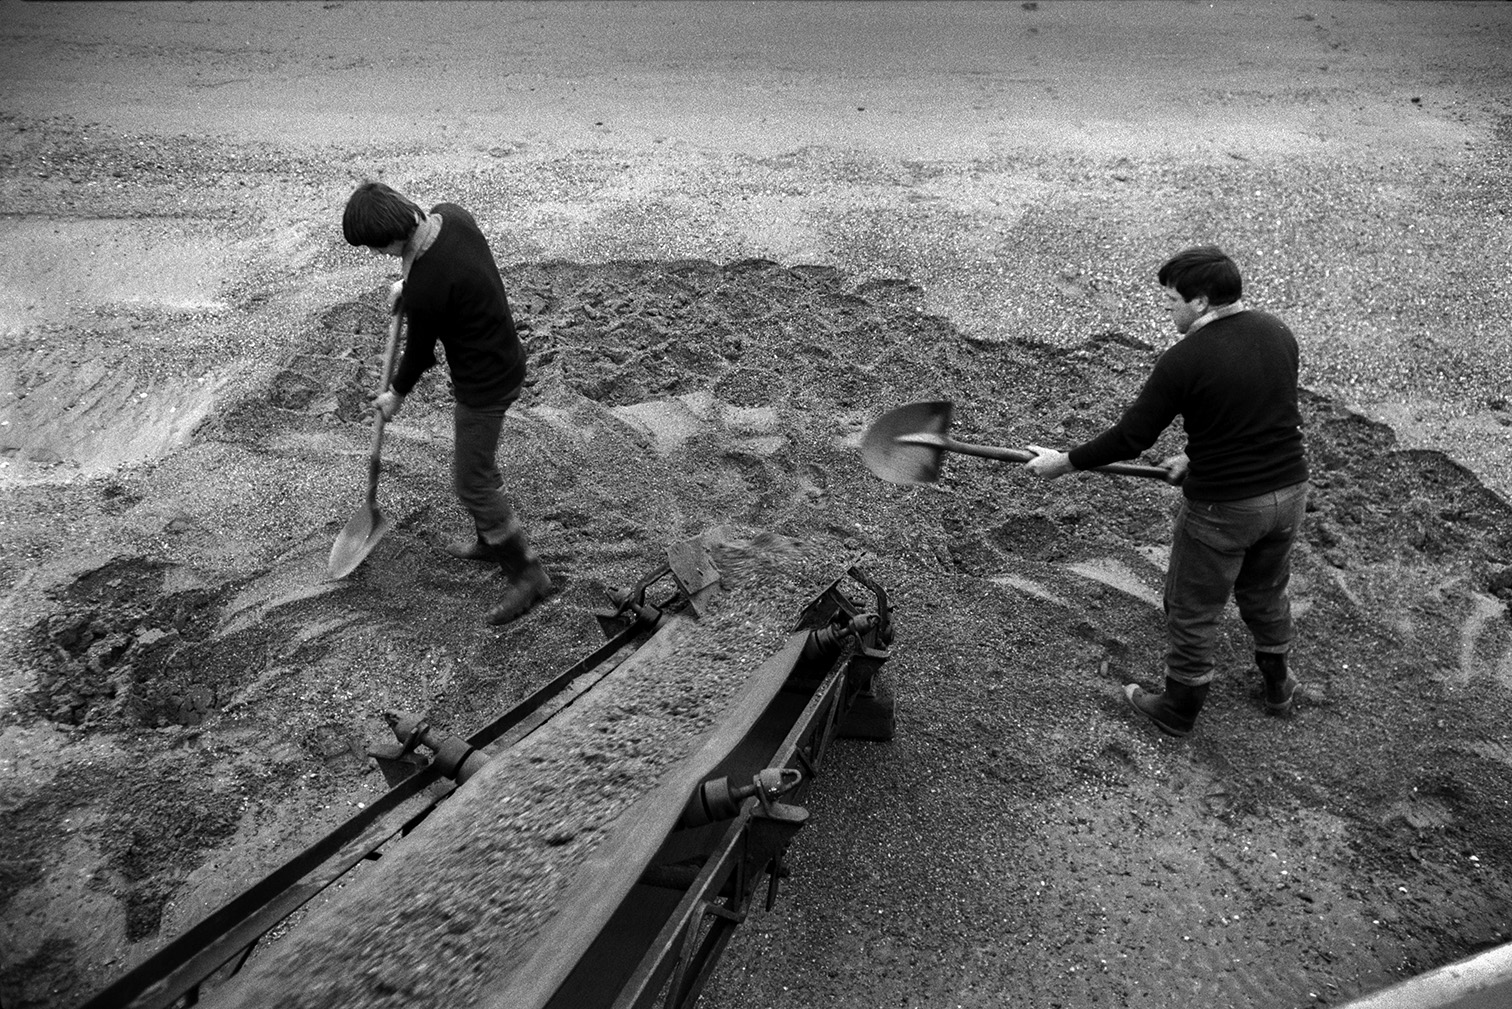 Men shovelling sand from the beach onto a conveyor belt or elevator attached to a sand barge at Crow Point, Braunton. The image is taken from the barge.